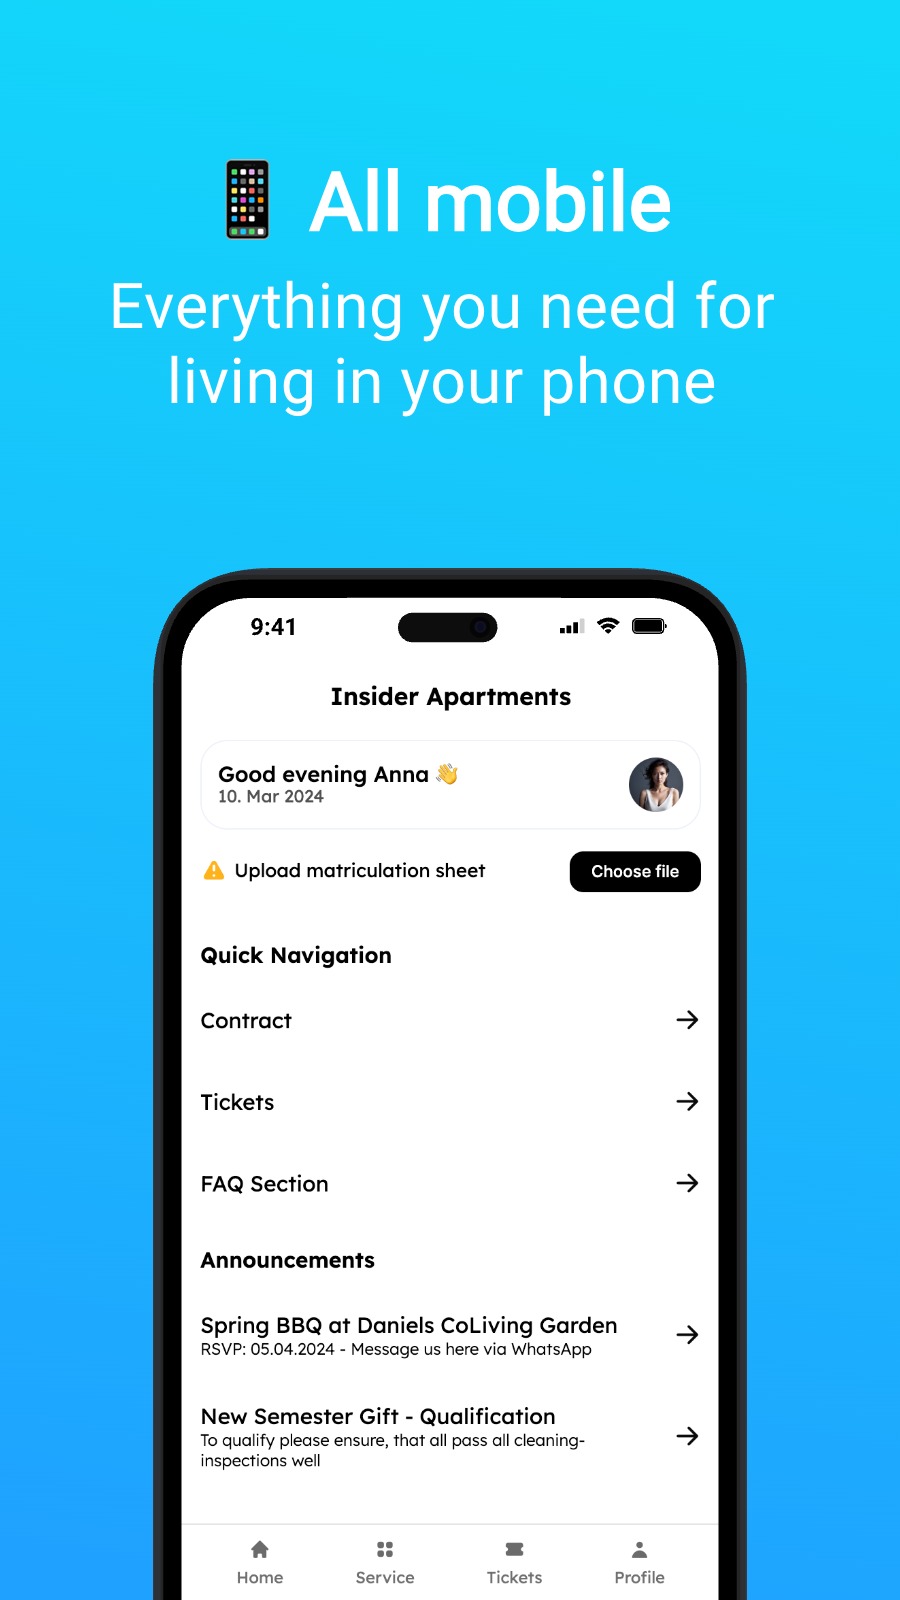 📱 All mobile - Everything you need for living in your phone